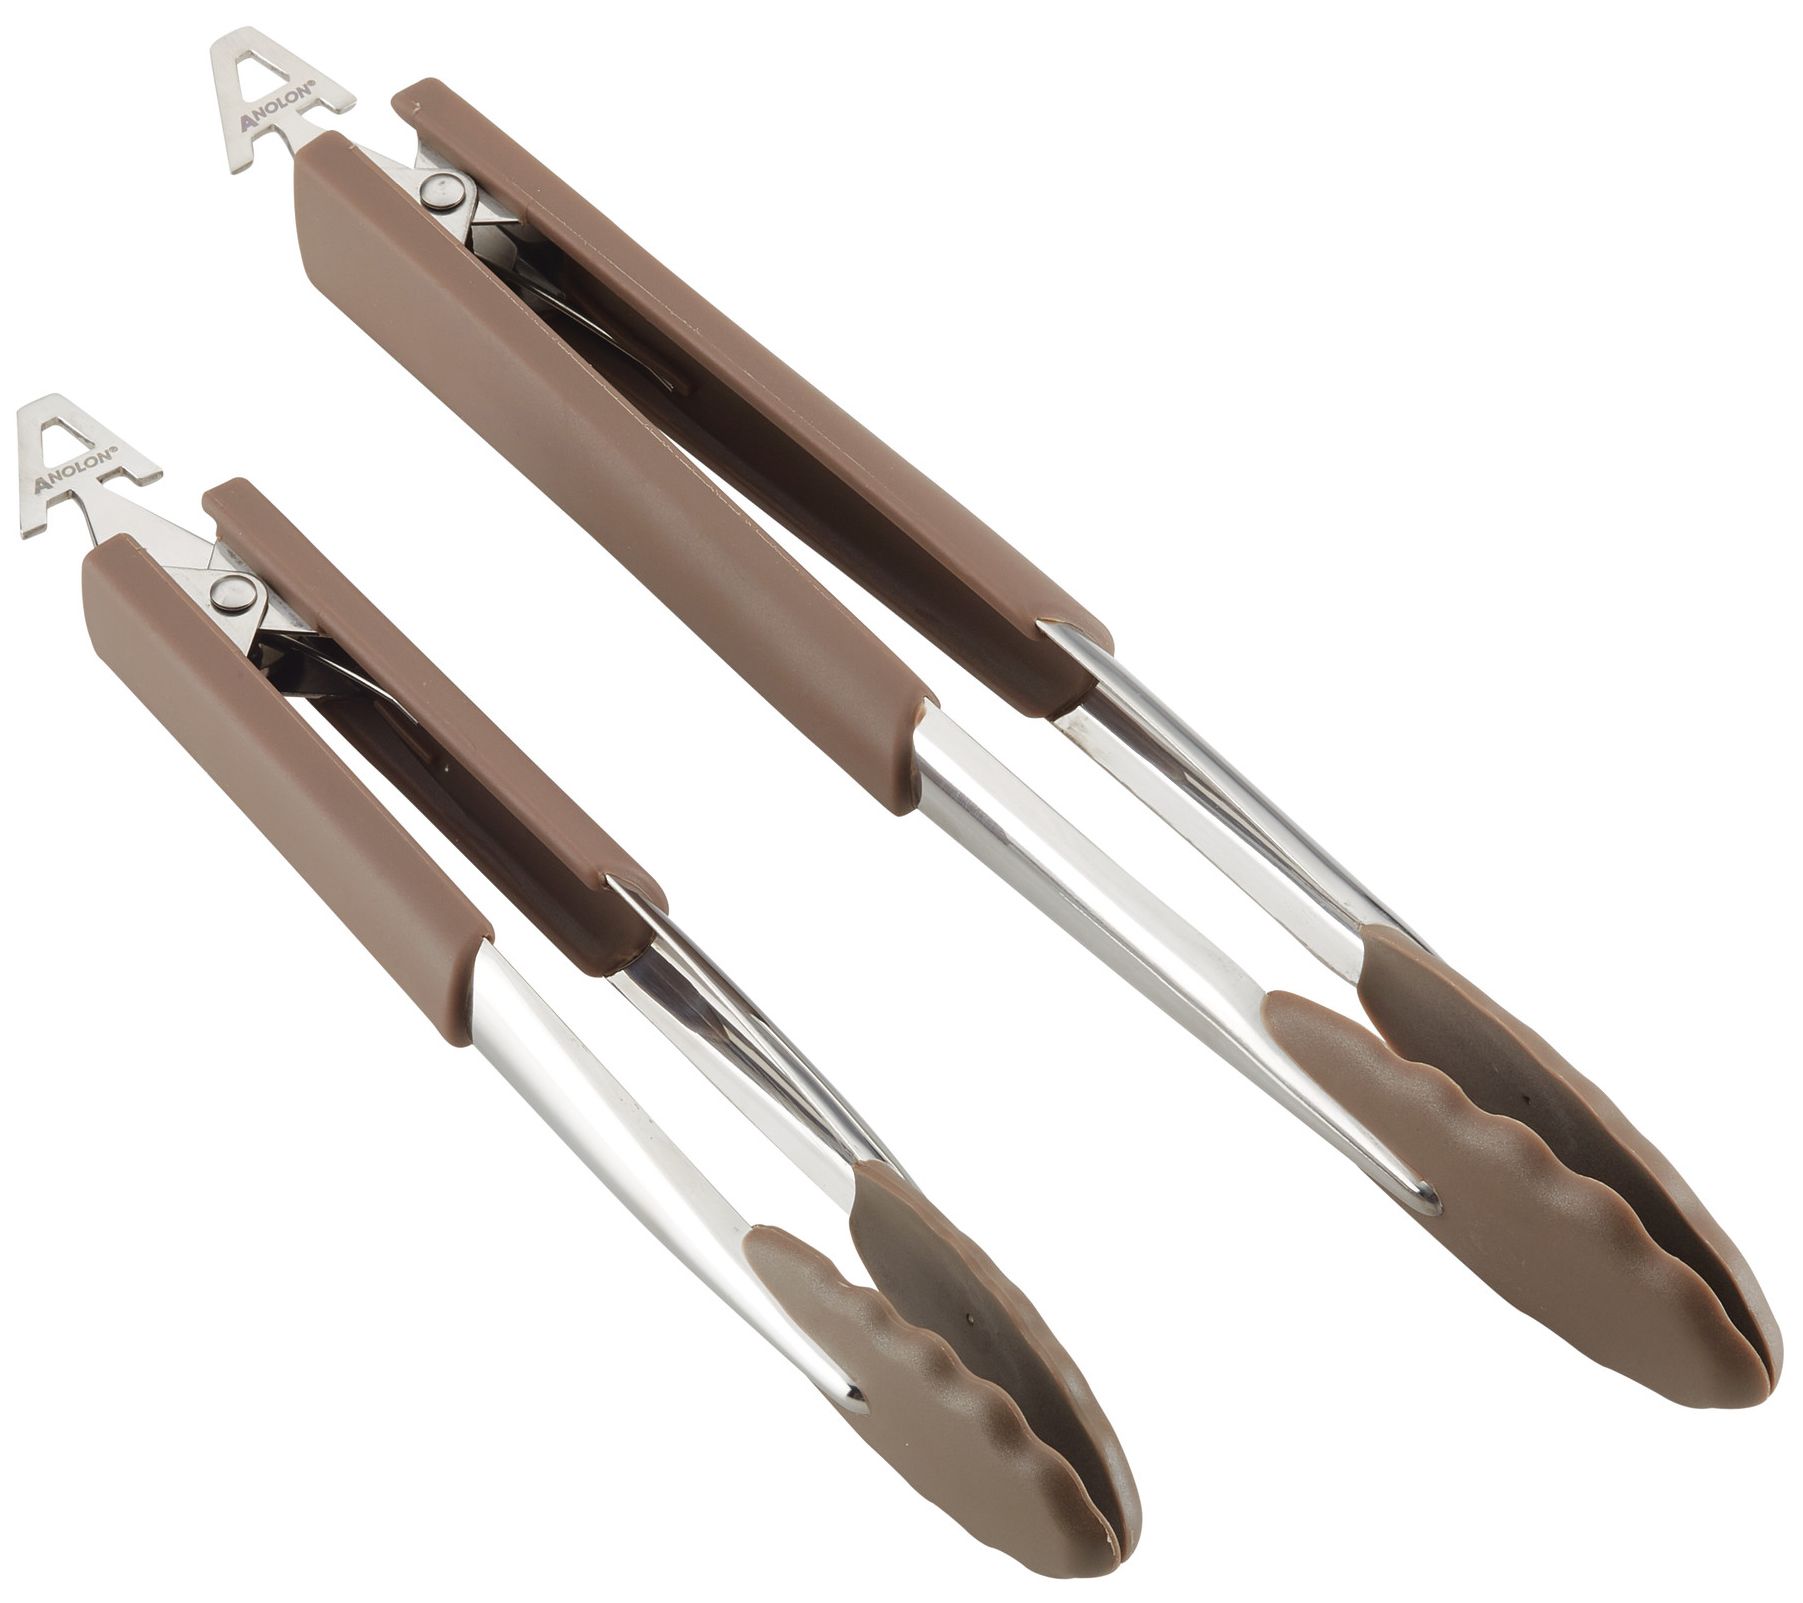 Classic Cuisine 3-piece Stainless Steel Kitchen Tongs - 8683387